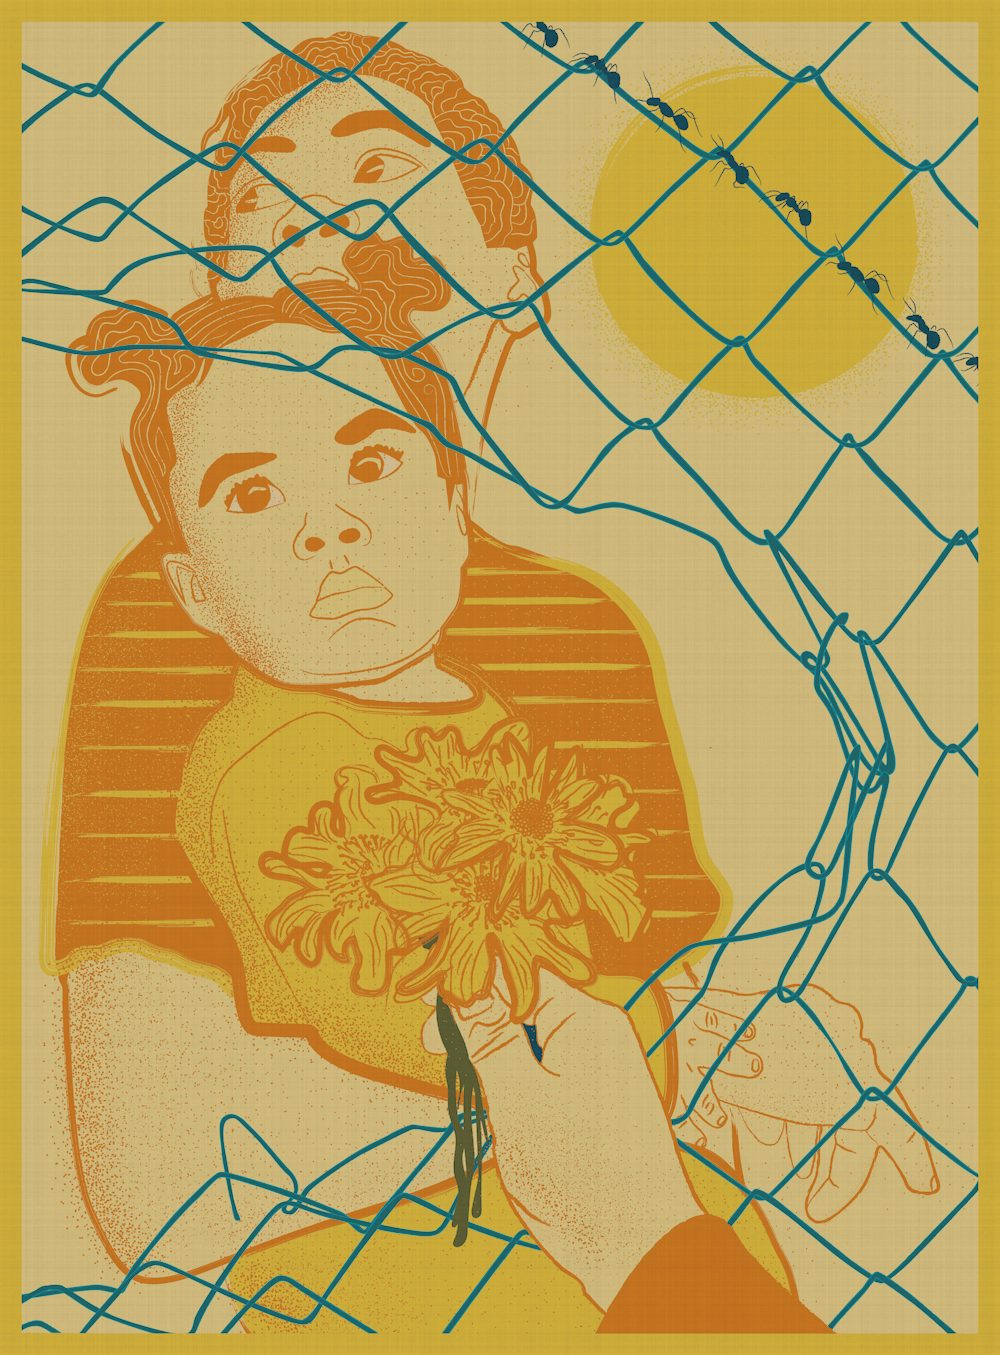 Illustration of a woman holding a small child behind a chain link fence 